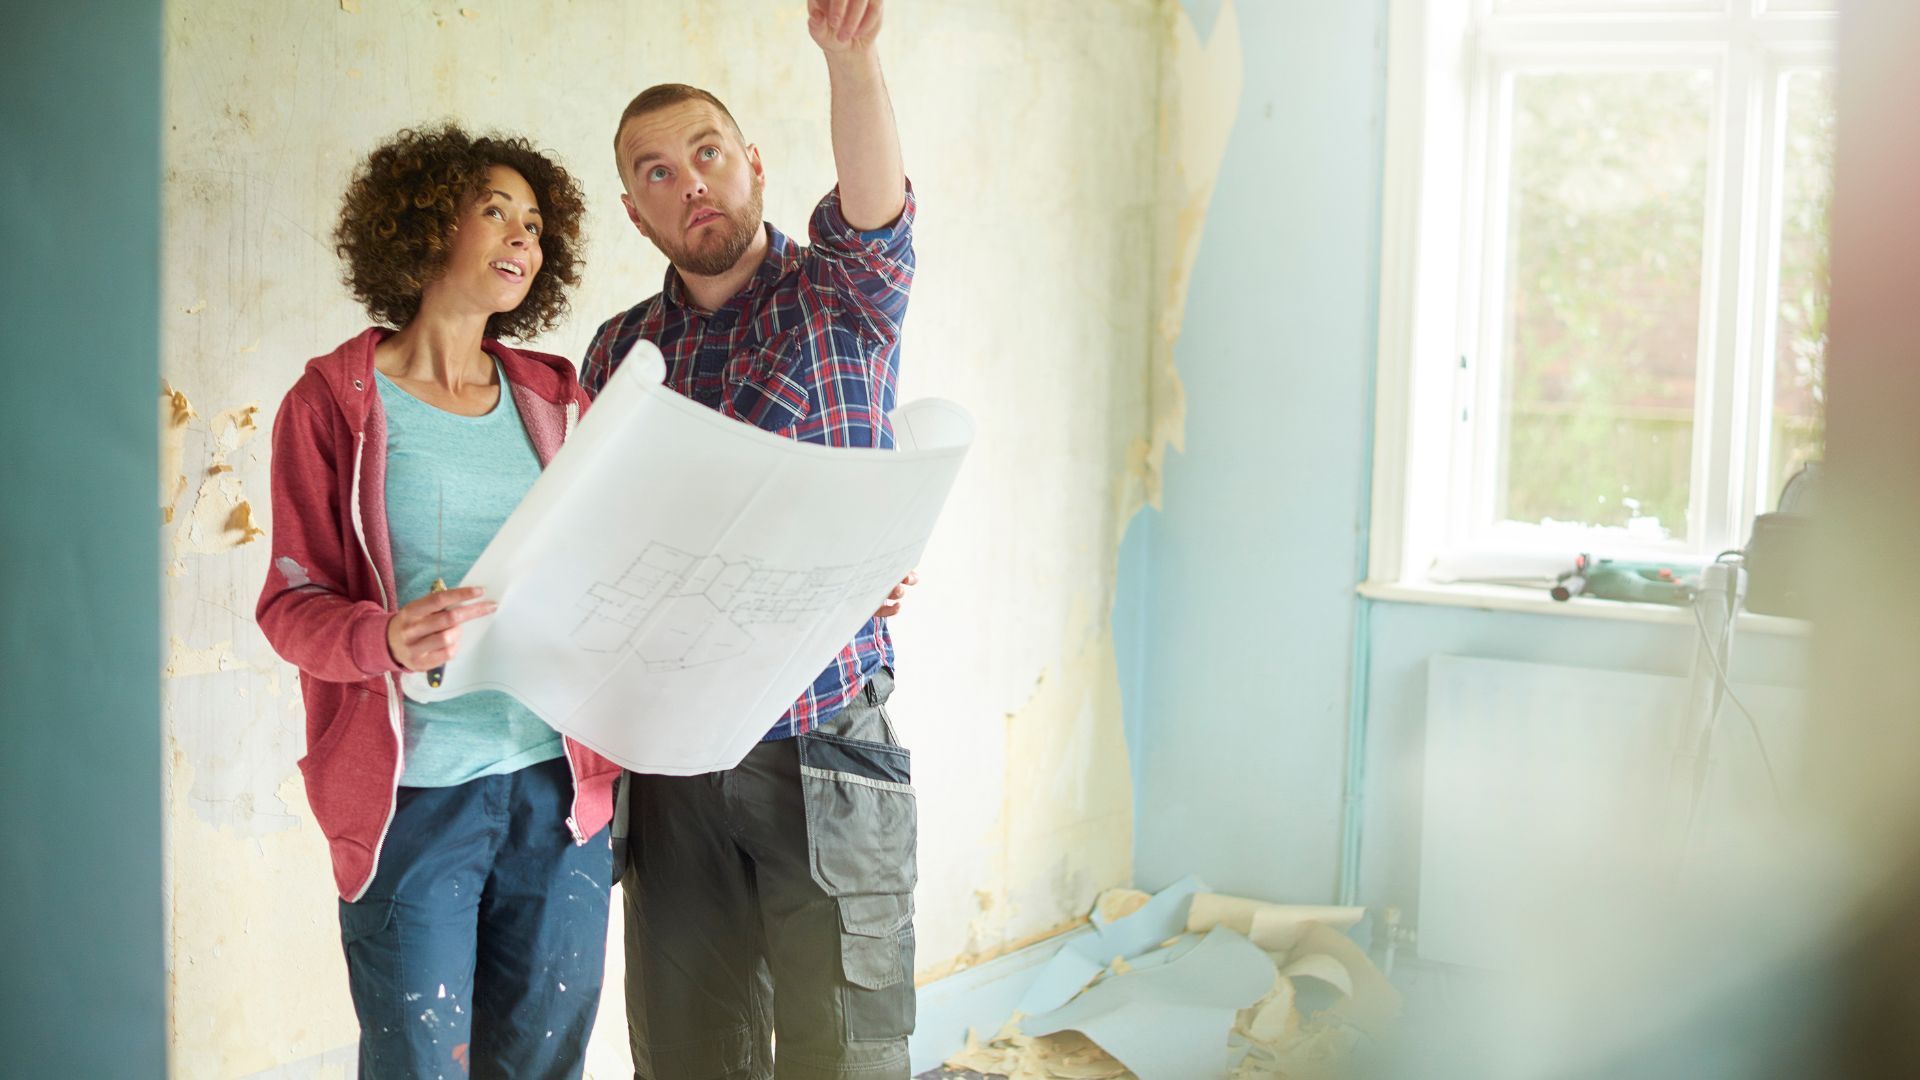 A couple is actively engaged in a home renovation project in Athens, GA. They are standing in a room that shows signs of ongoing work, such as peeling paint and bare walls. The man, wearing a plaid shirt and cargo pants, is holding a set of blueprints and pointing upwards, explaining the planned changes. The woman, in a casual outfit with a measuring tape, looks on with interest. They are collaborating, envisioning the potential of their space amidst the disarray of the renovation.